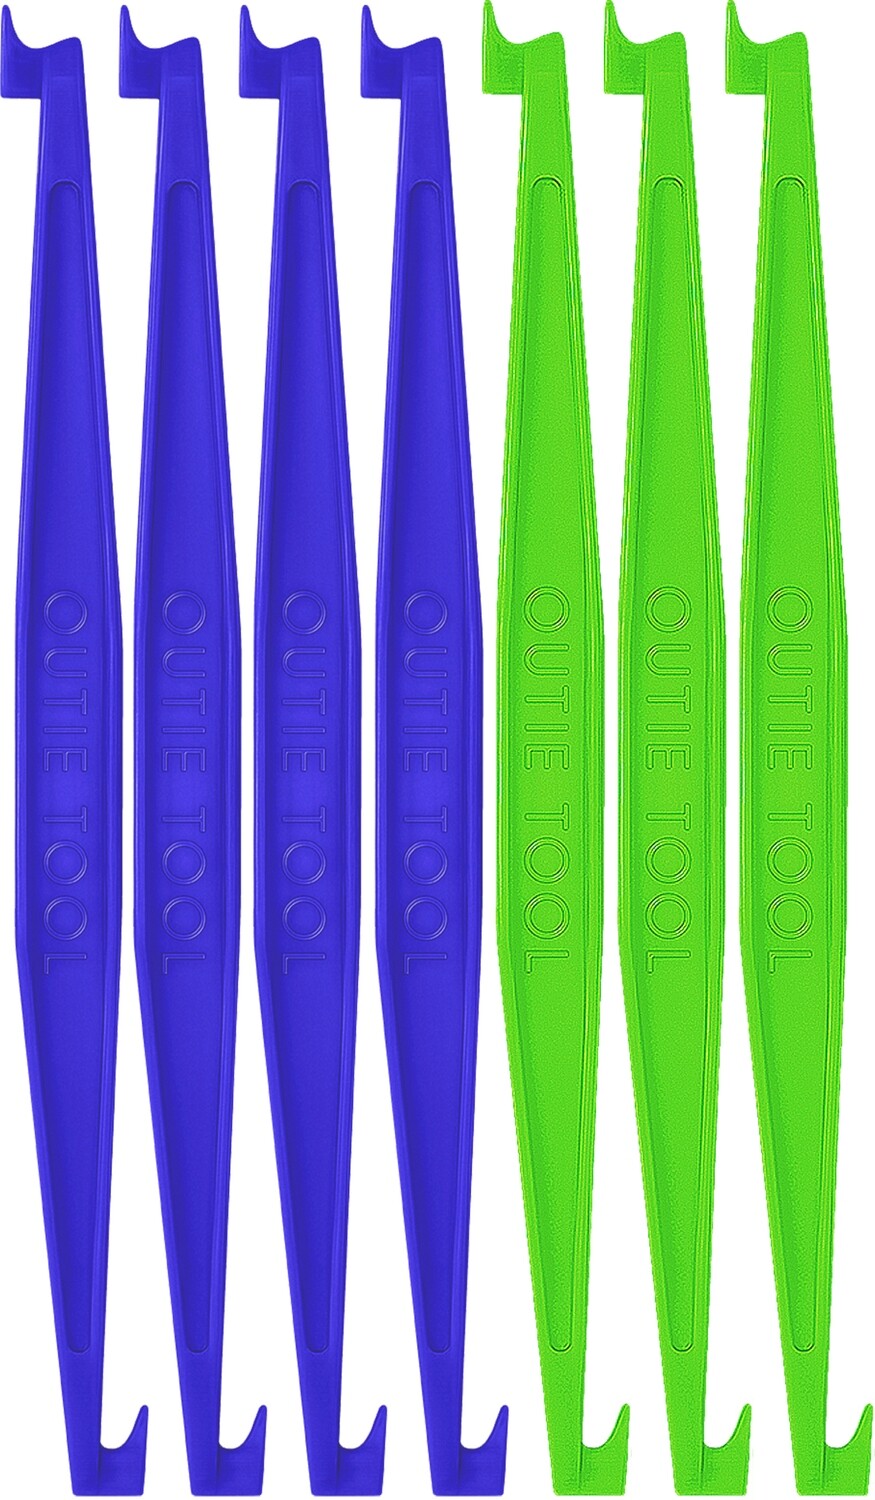 60 OUTIE TOOLS - 30 Neon Green, 30 Midnight -  Individually Packaged Singles